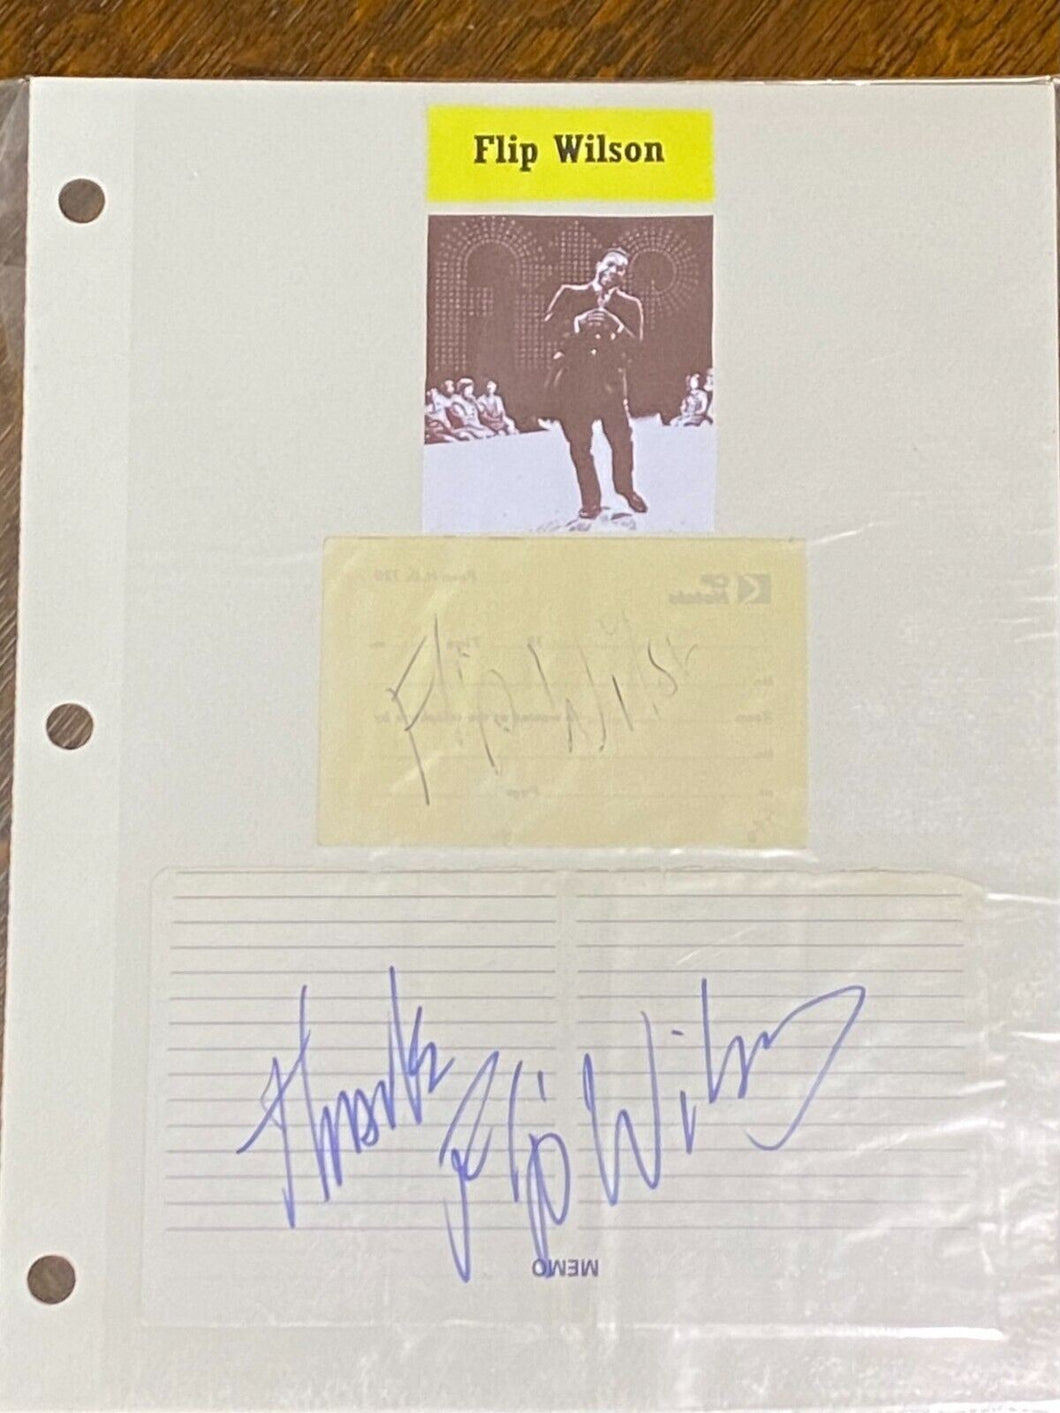 Flip Wilson two signatures in a paper